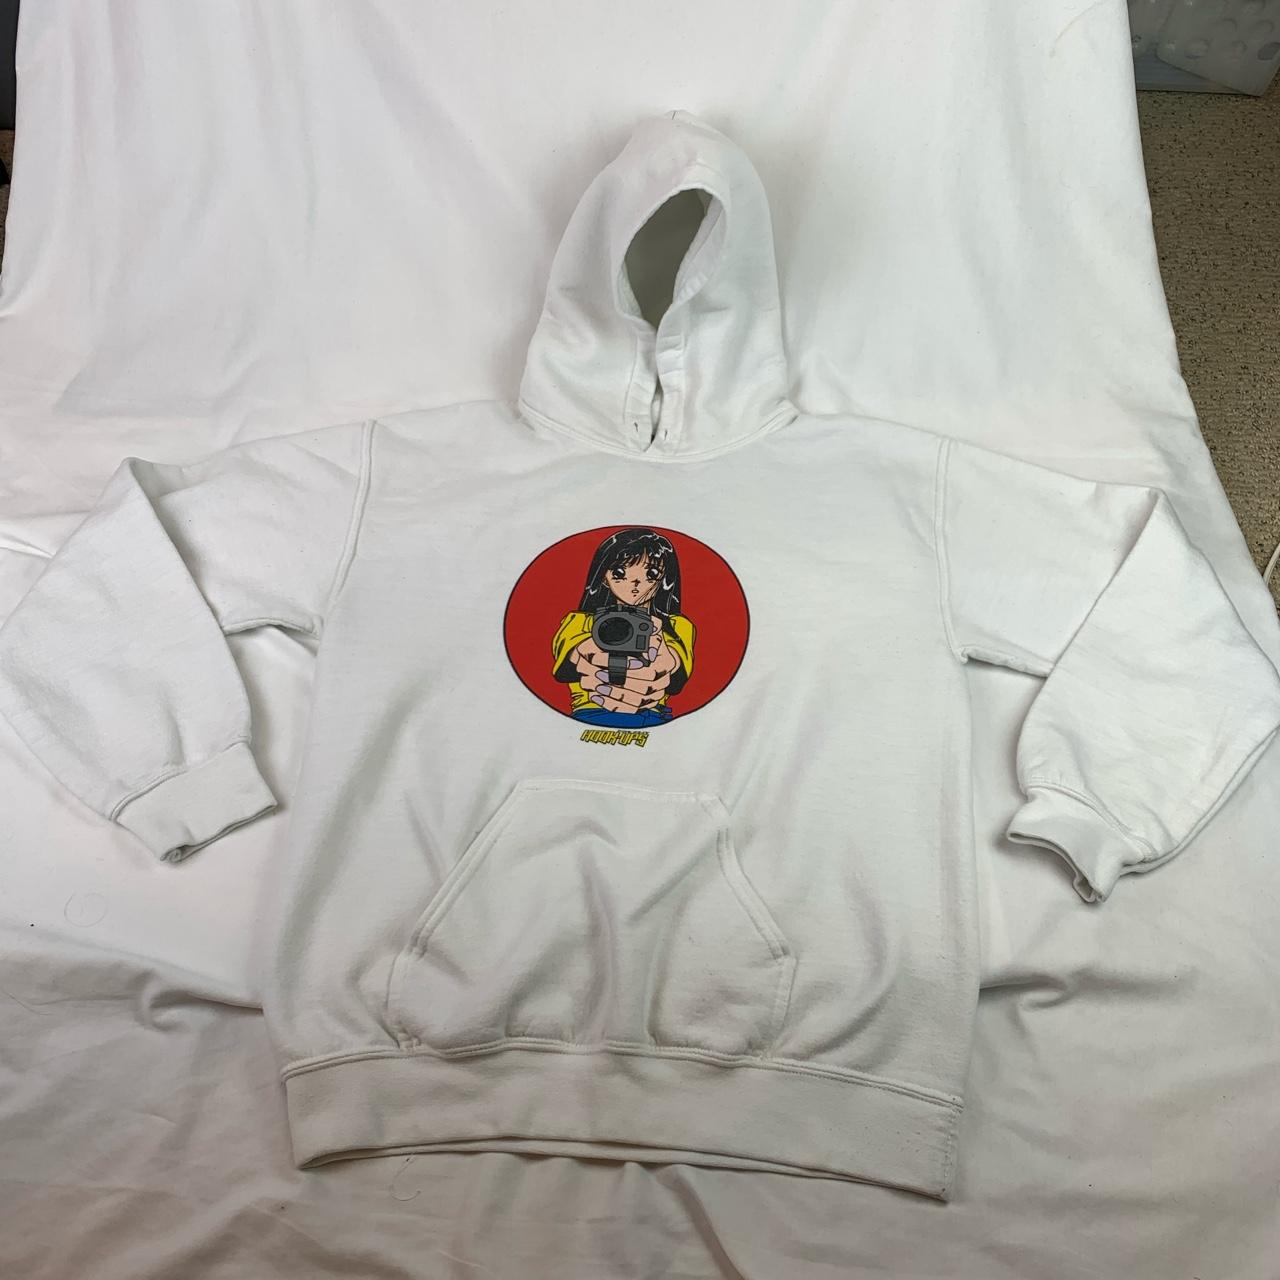 Hook-Ups Barrel Of A Gun White Hoodie. Not common to